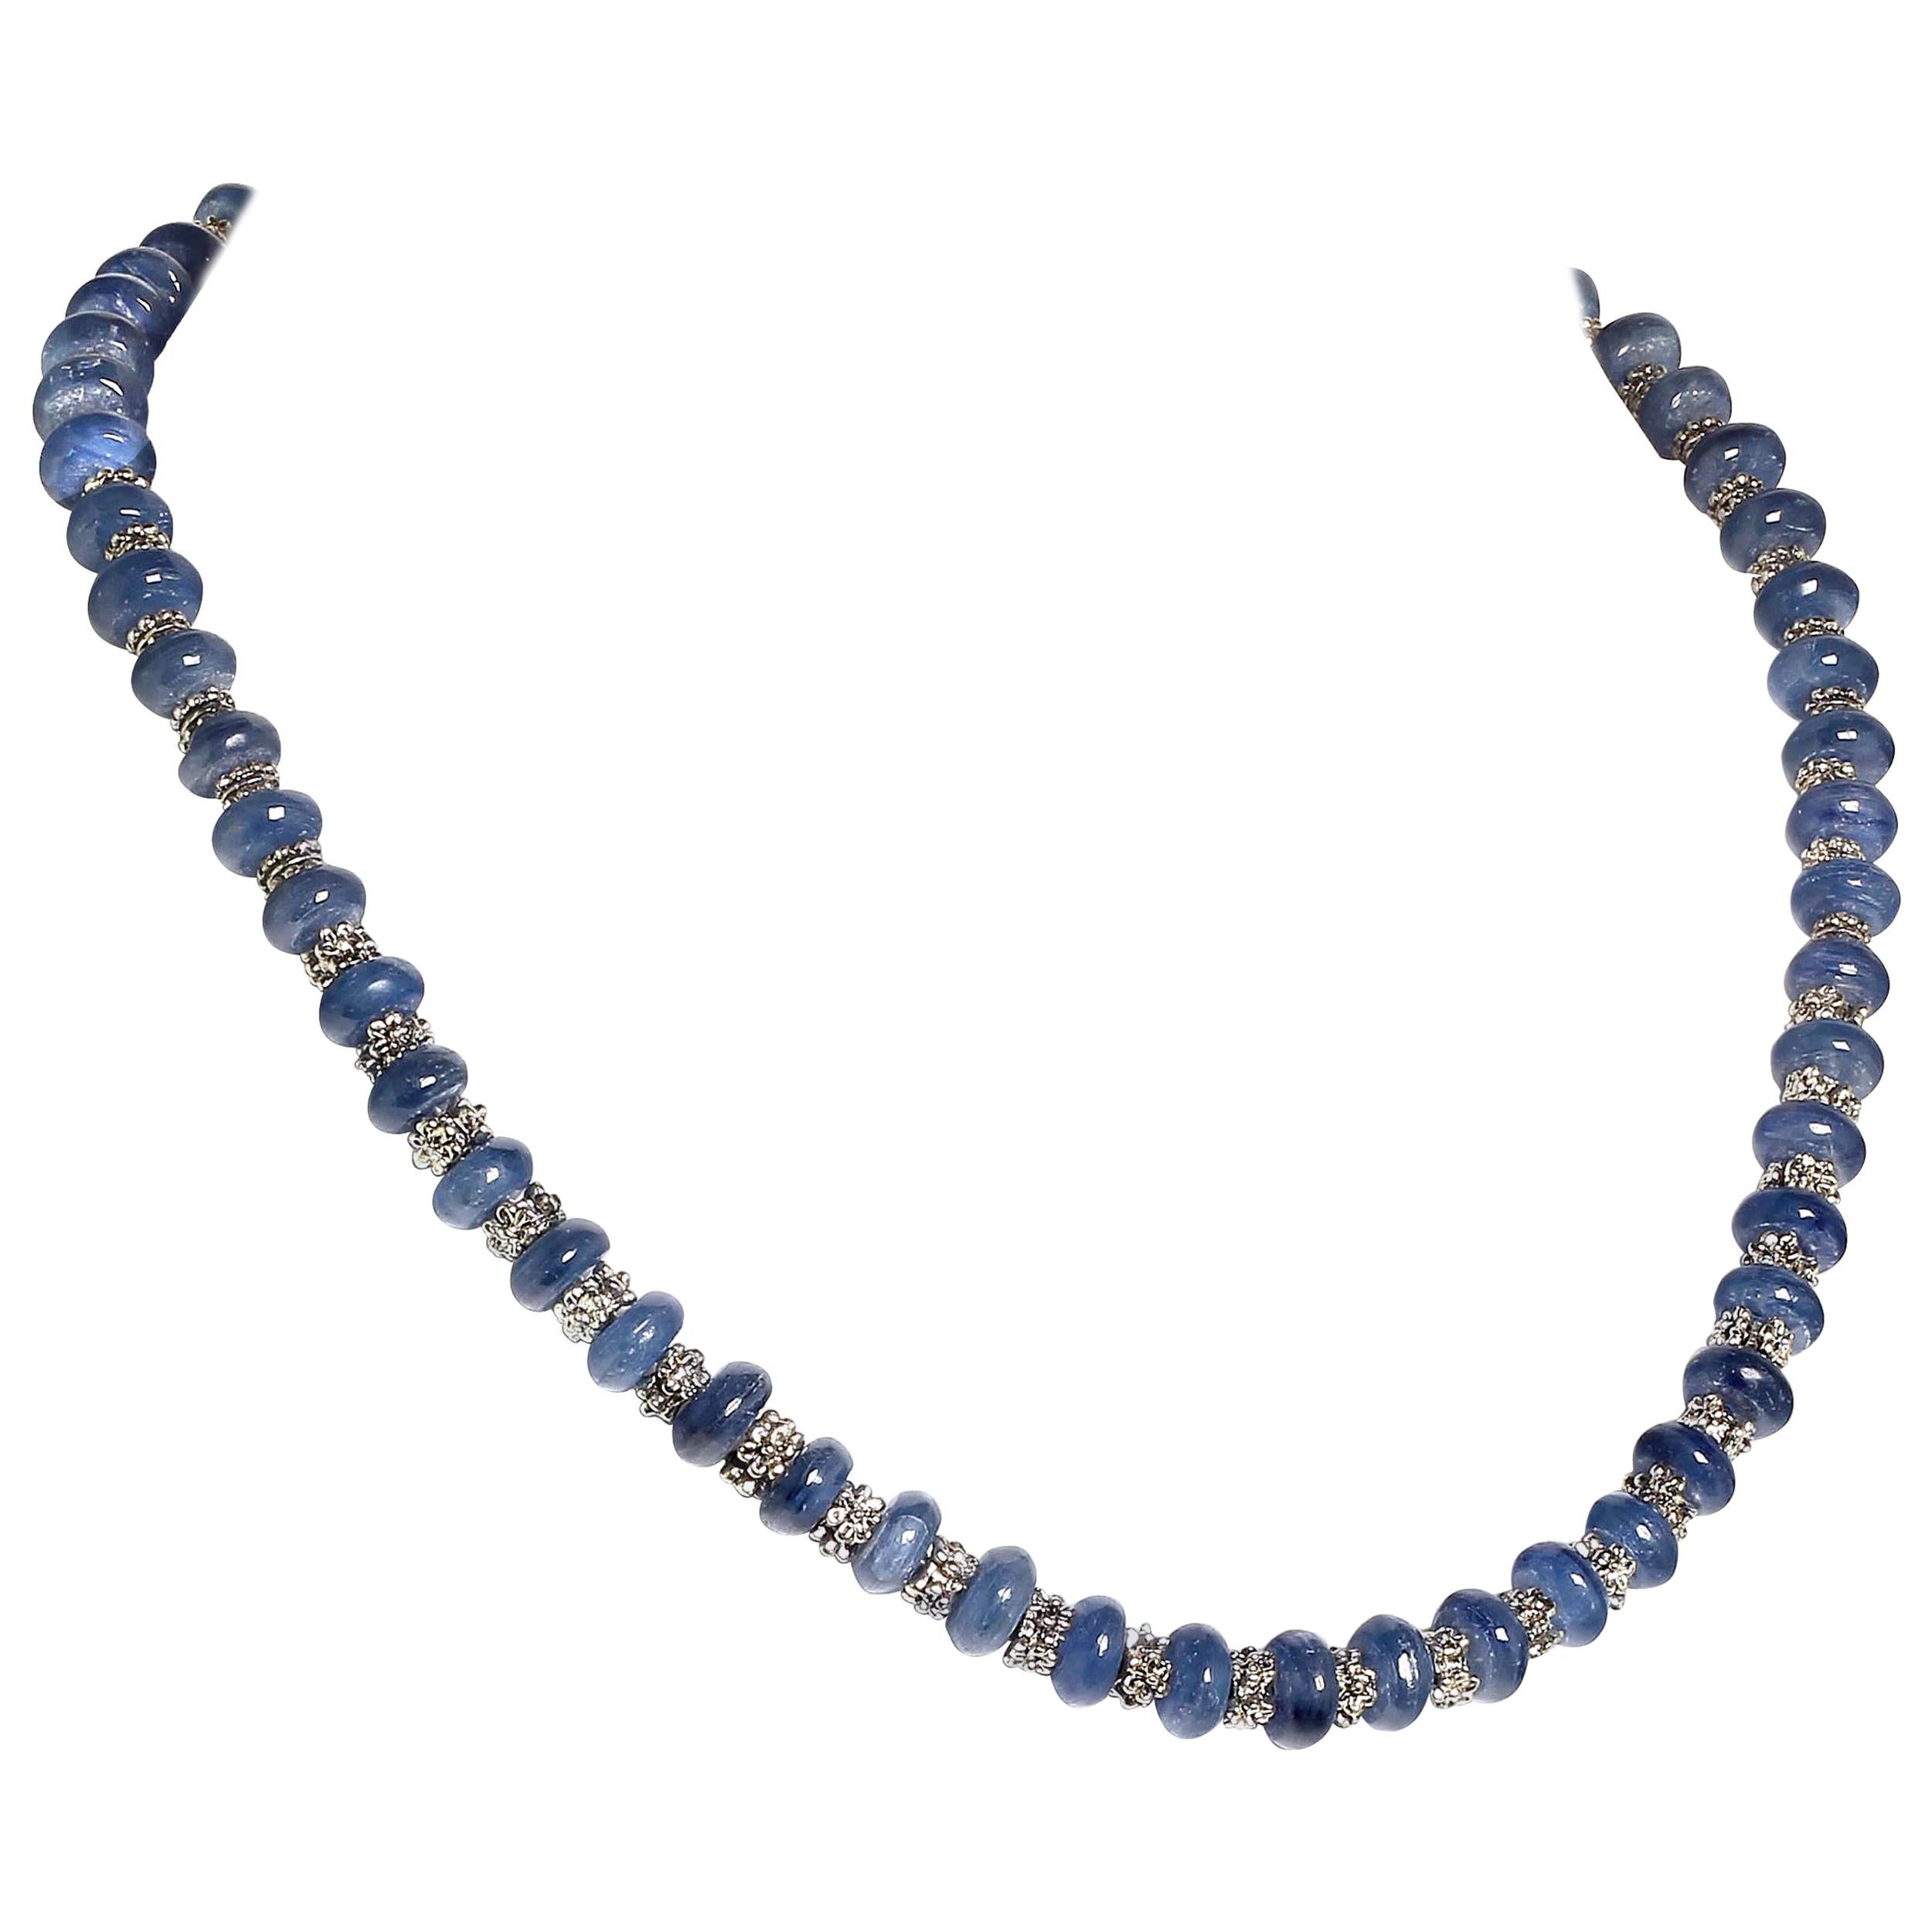  AJD Gorgeous Necklace of Blue Kyanite Alternating with Silver Bali